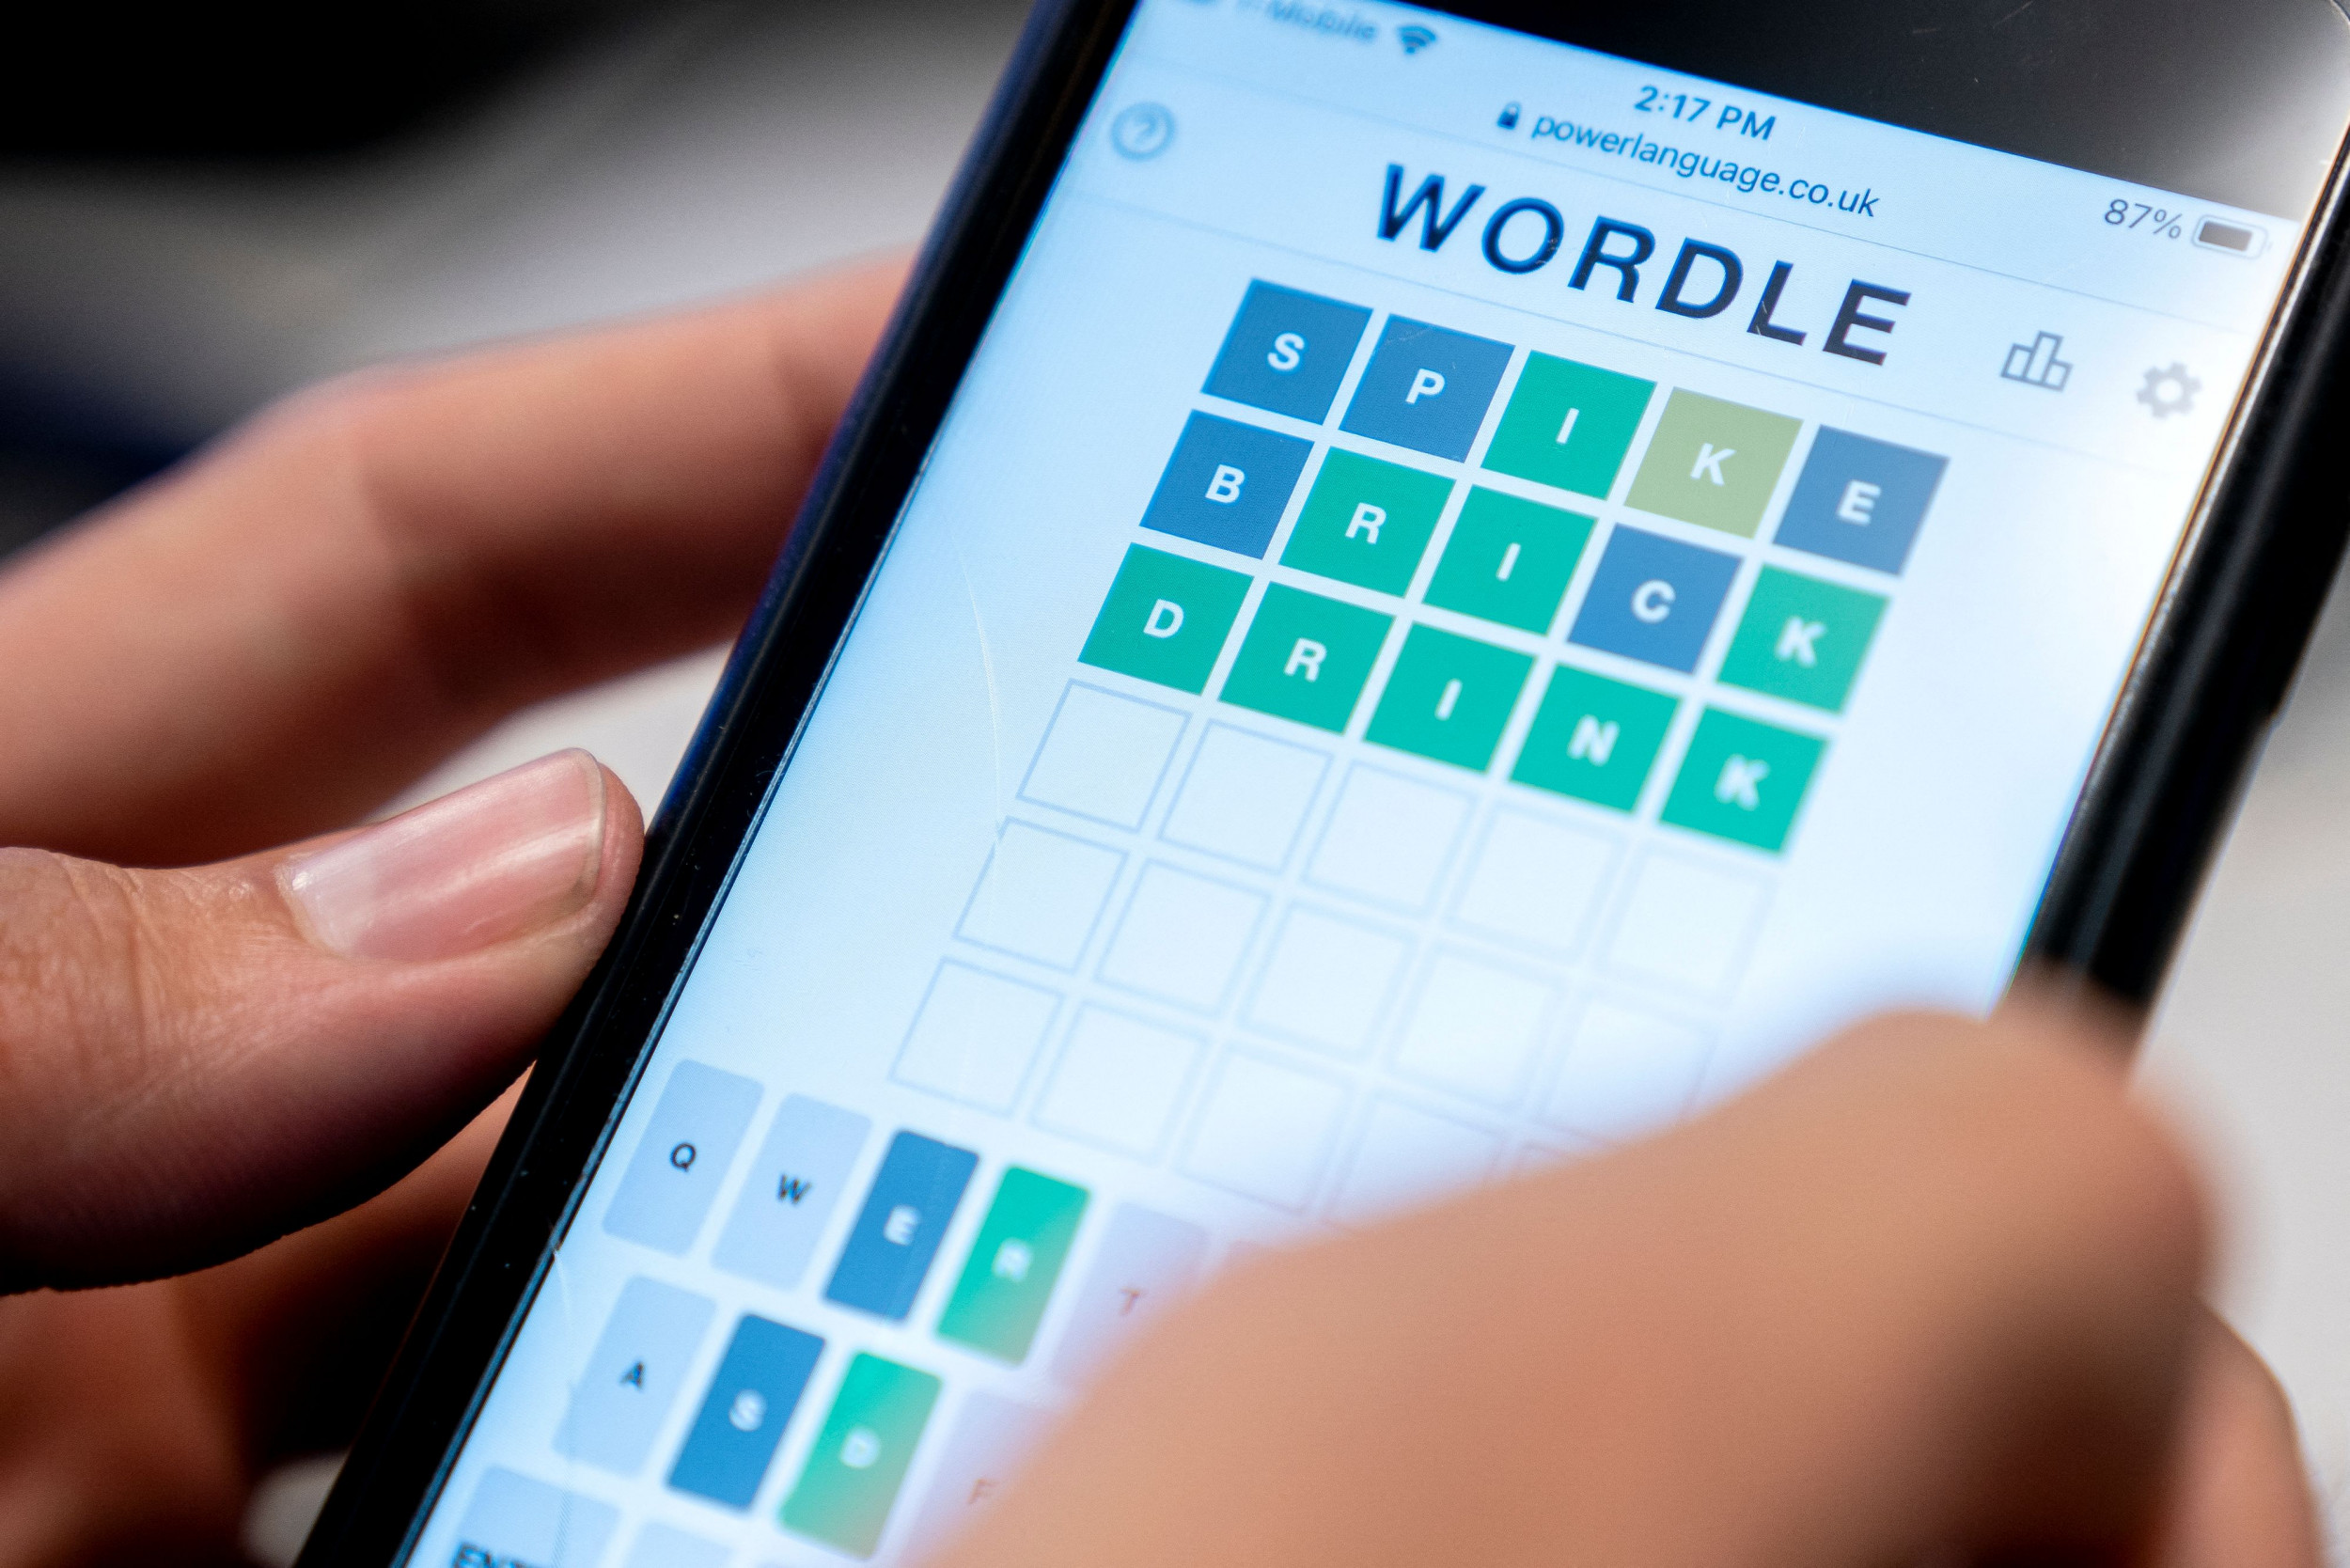 Wordle Creator Sells Game for 'Low Seven Figures' Four Months After Launch